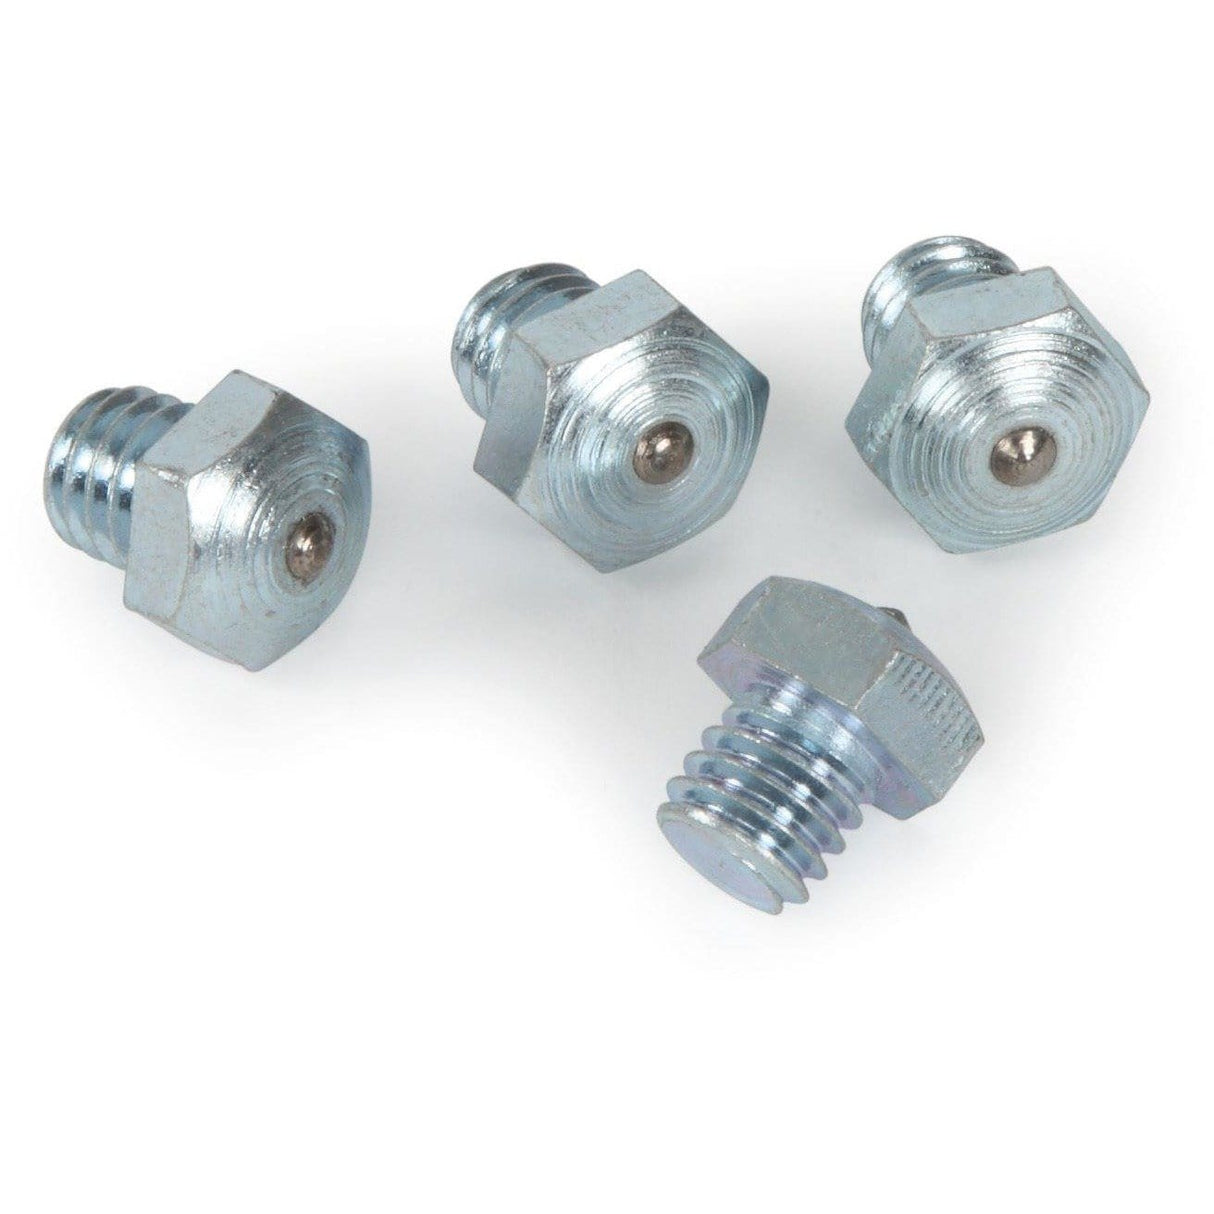 Shires Studs for Firm, Dry Ground 6mm